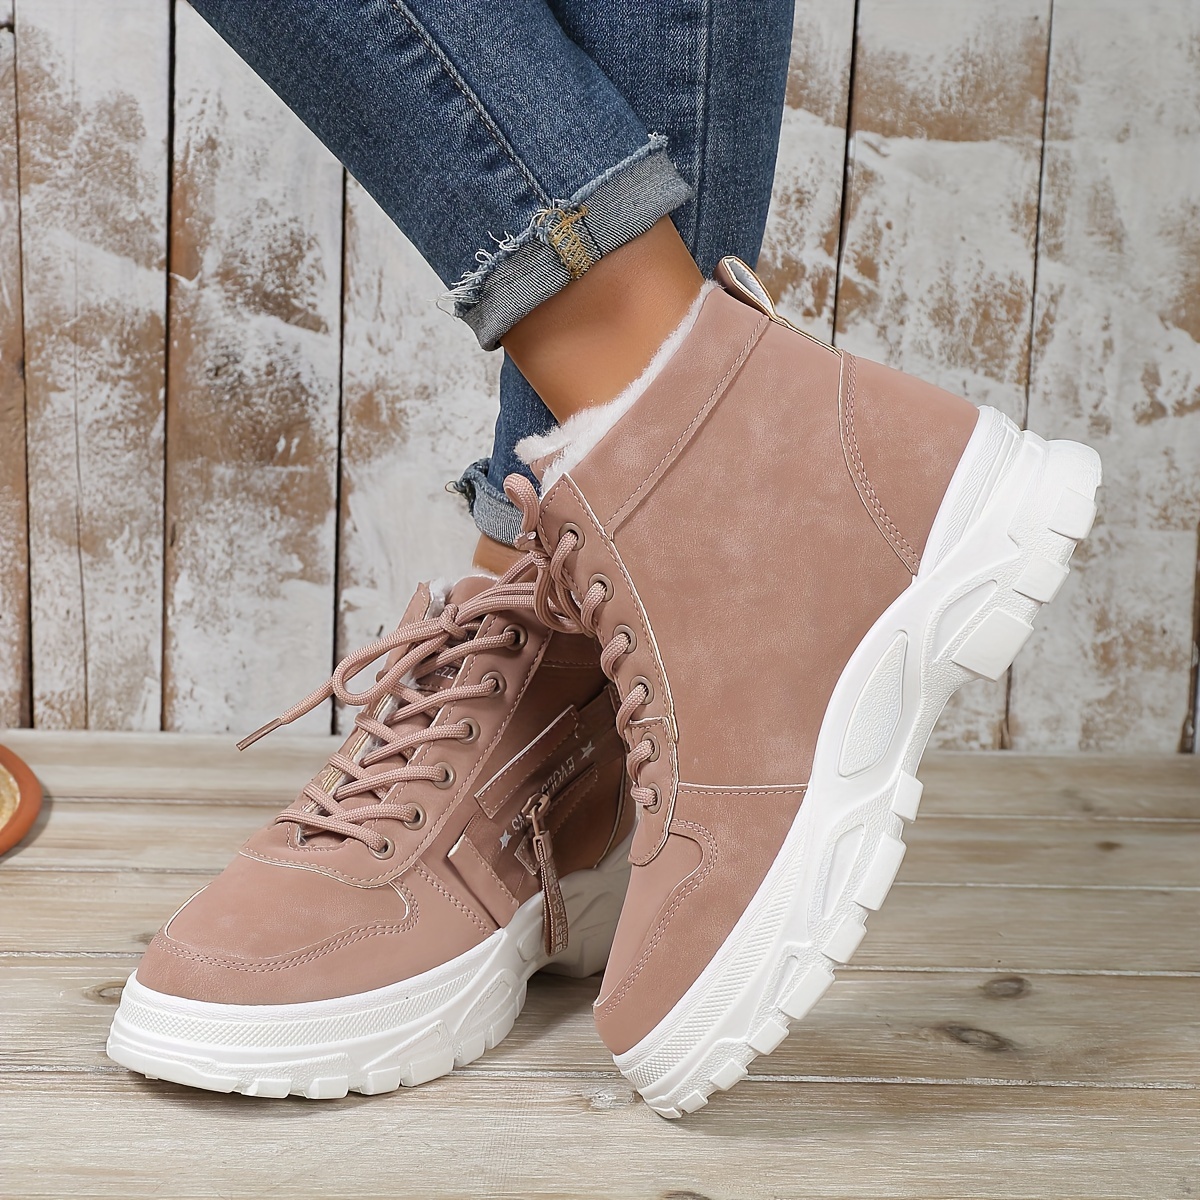 womens winter high top sneakers casual lace up plush lined boots comfortable side zipper short boots details 5